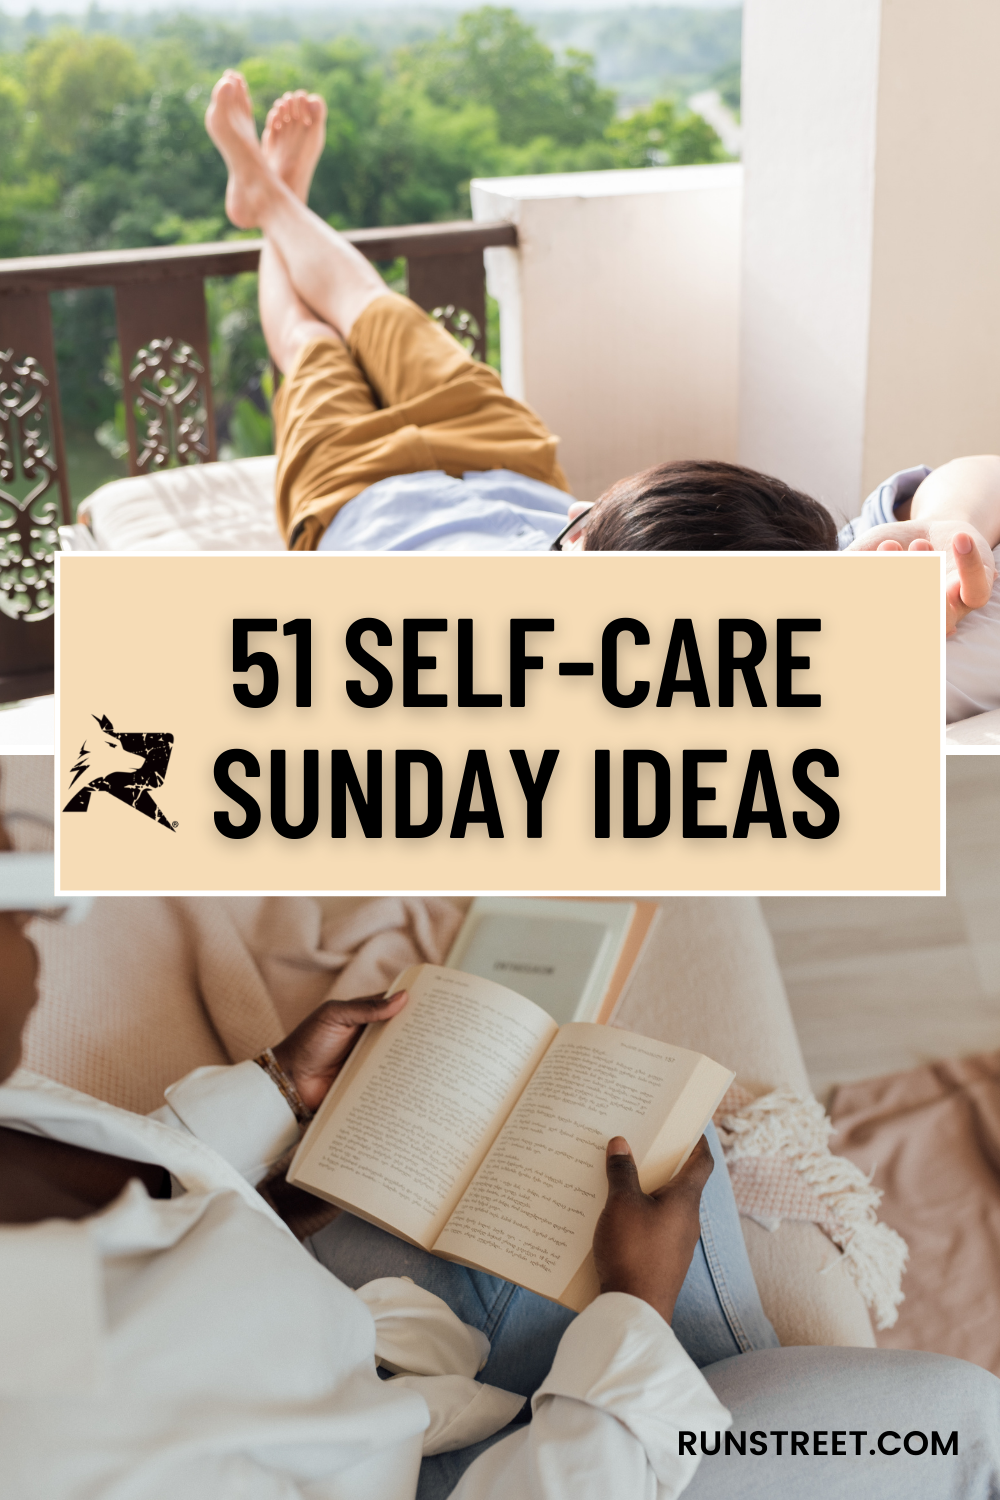 Digital Vision Board - Step-by-Step Guide - Self-Care Sunday, Love